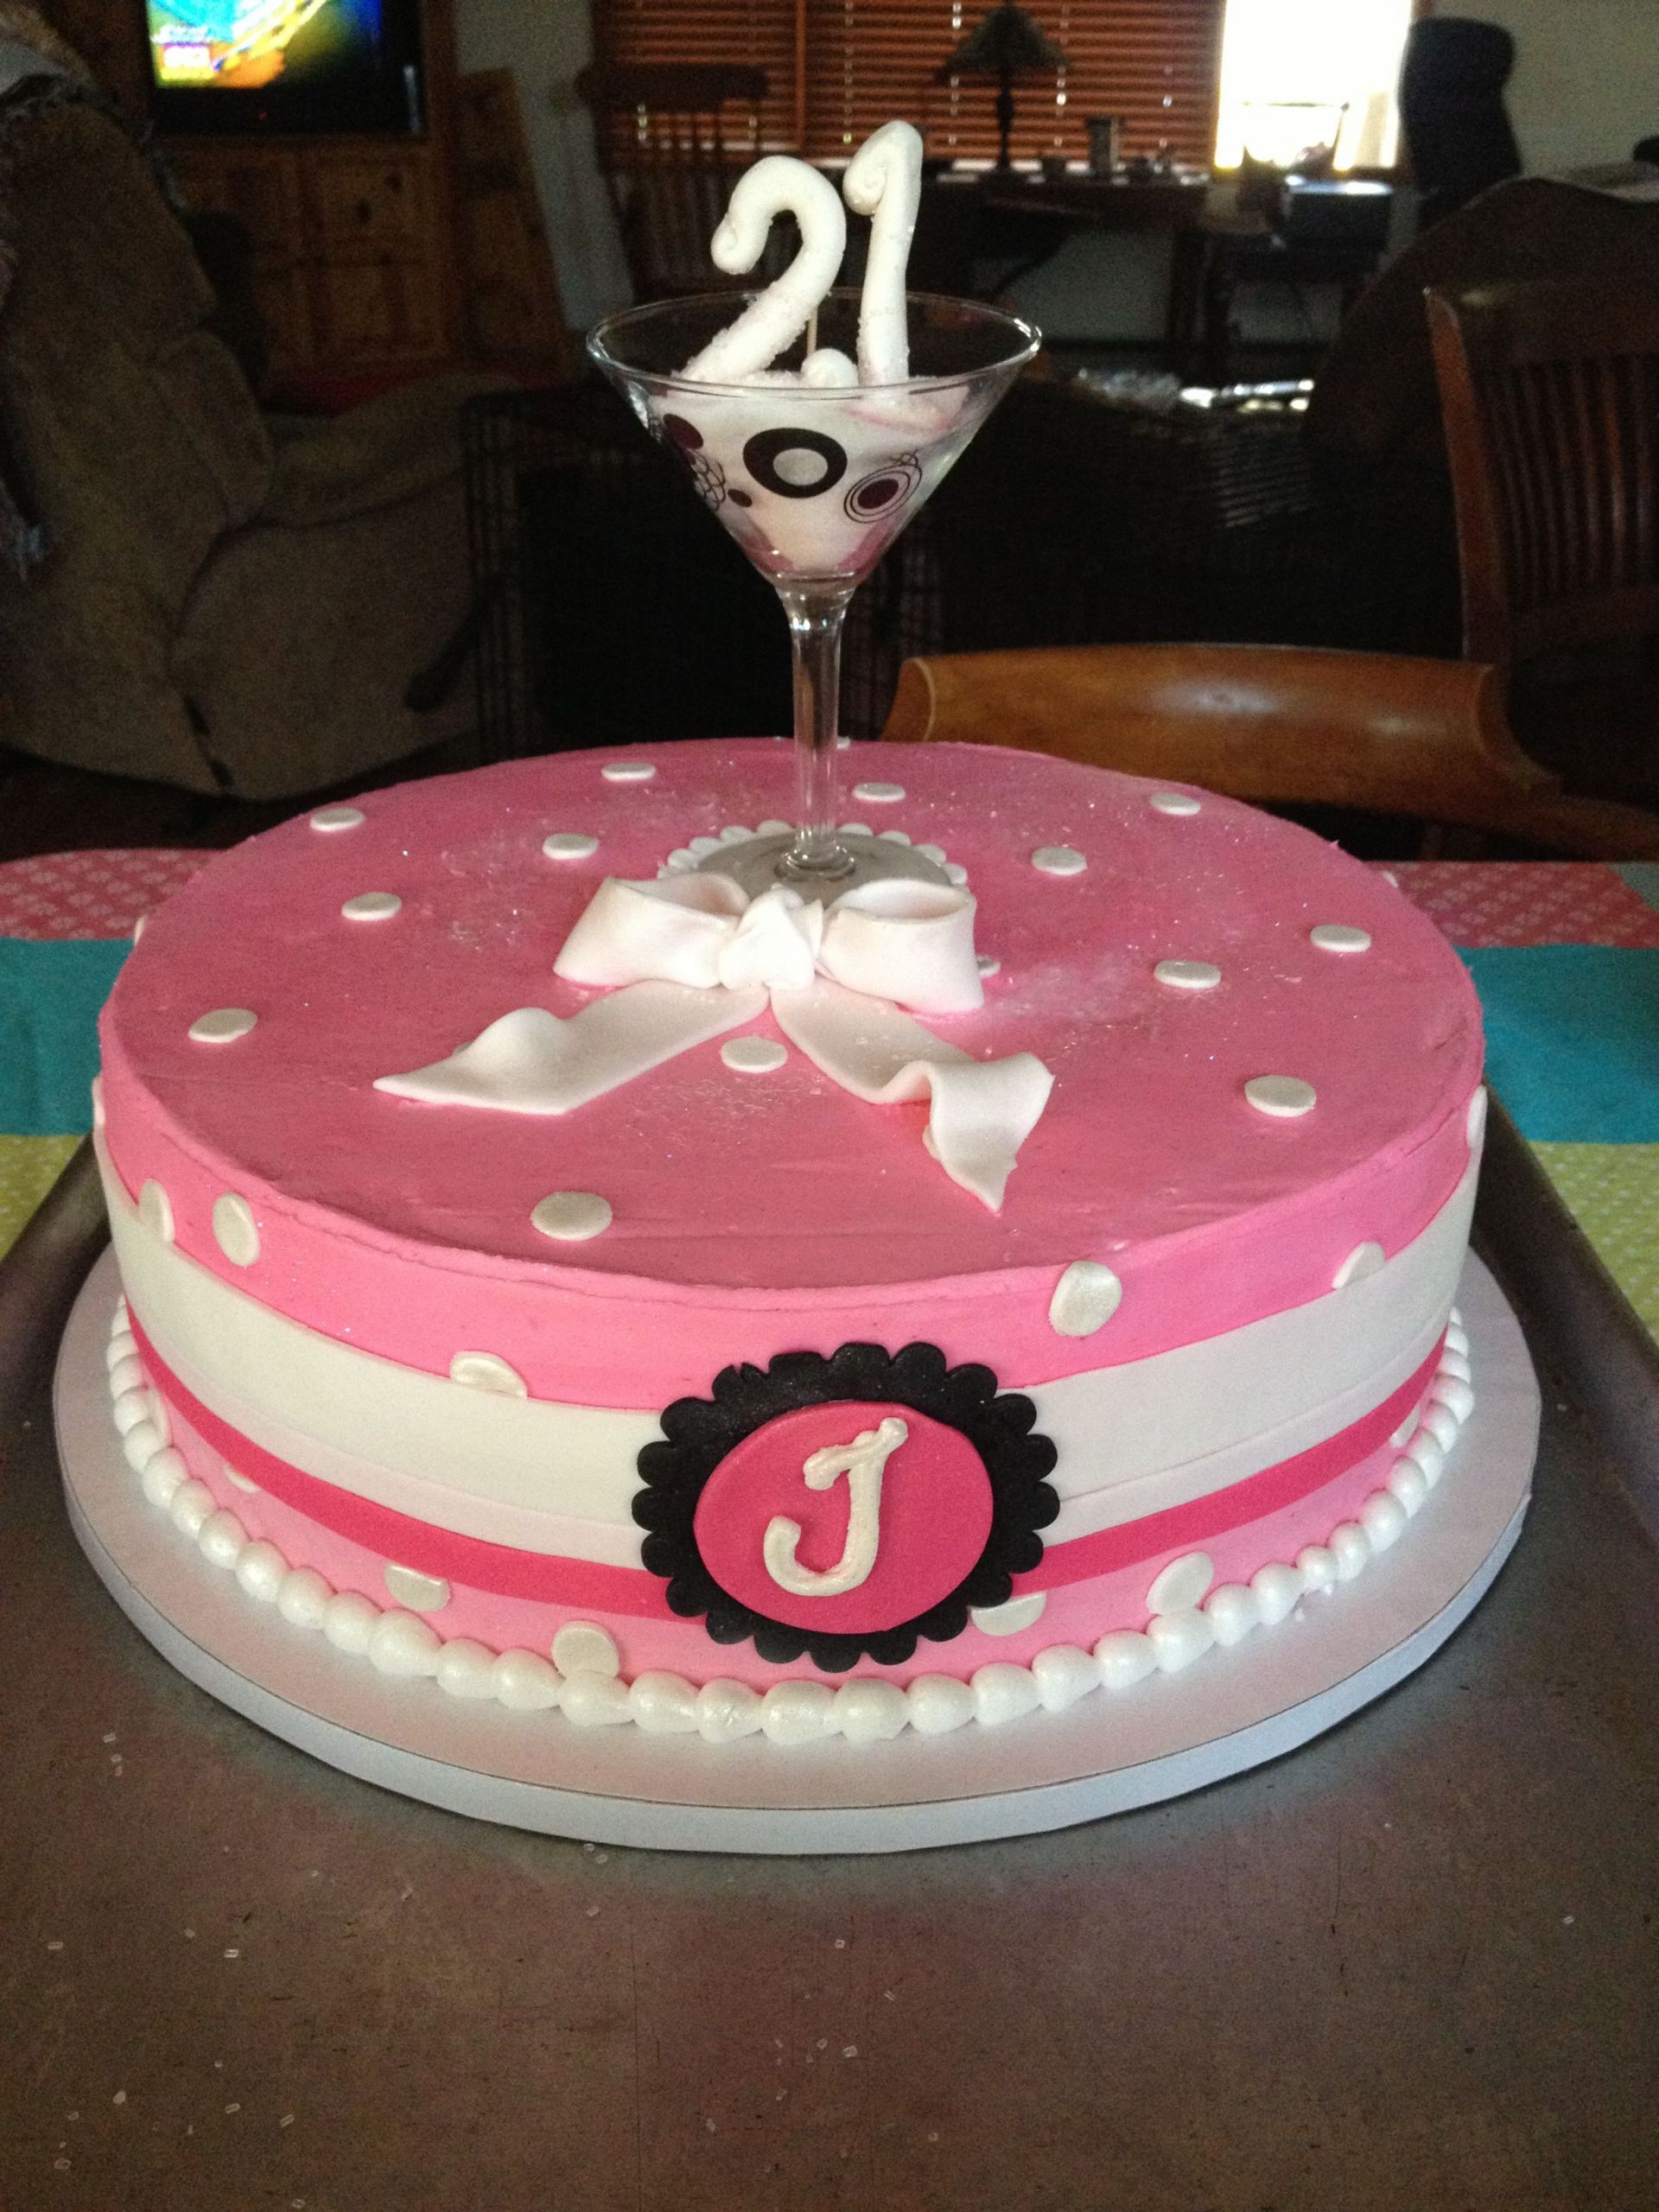 21st Birthday Cake Decorations
 Love this idea und cake with a martini glass on top